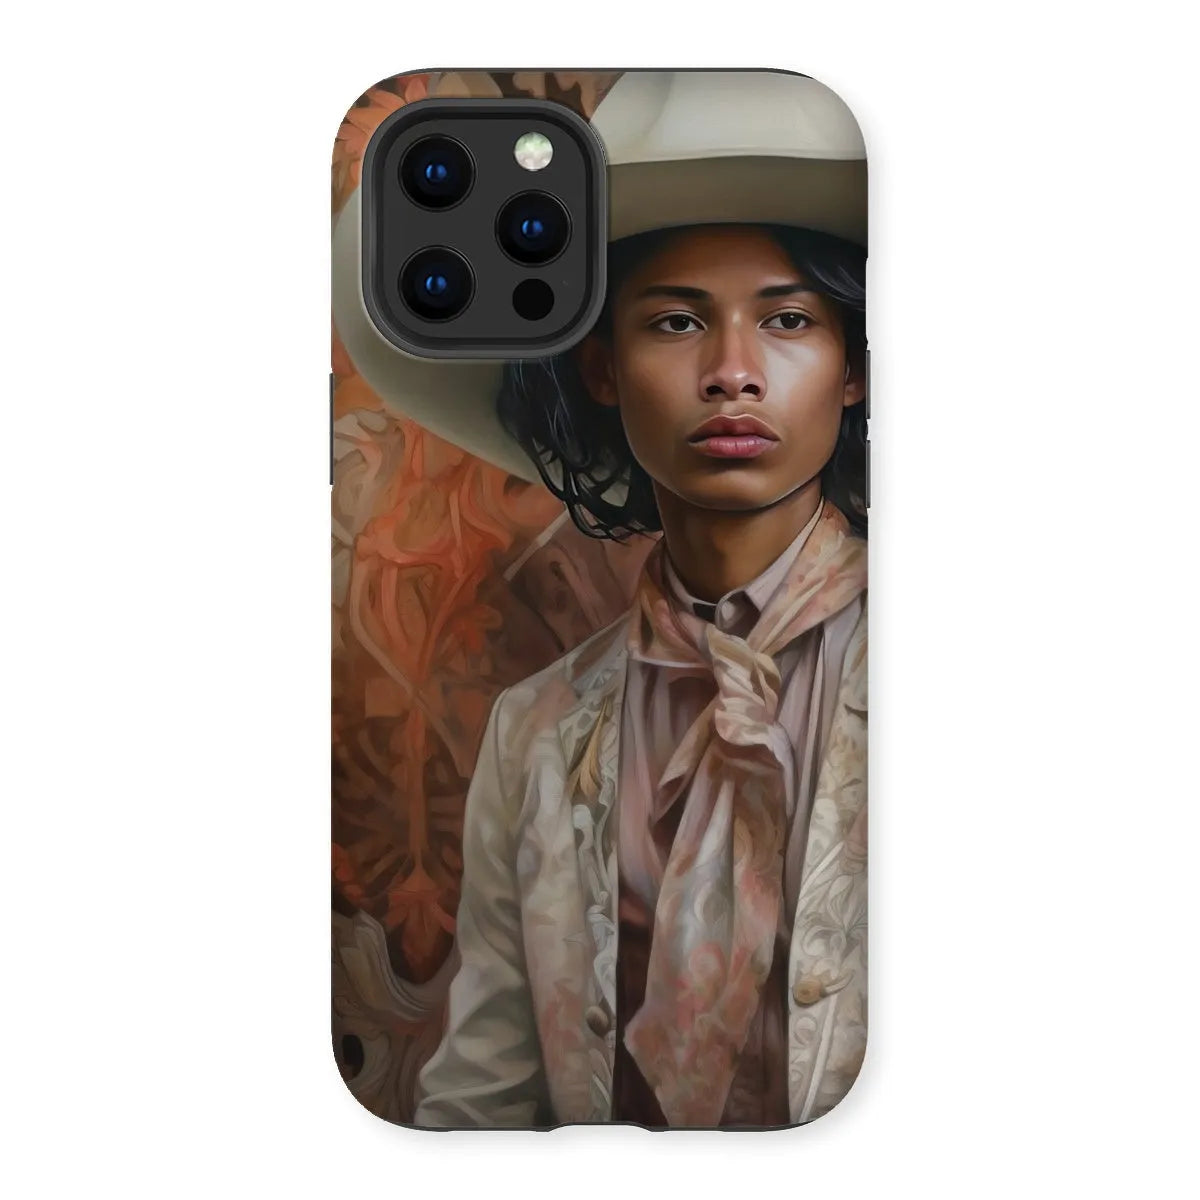 Arjuna The Gay Cowboy - Gay Aesthetic Art Phone Case - Iphone 12 Pro Max / Matte - Mobile Phone Cases - Aesthetic Art